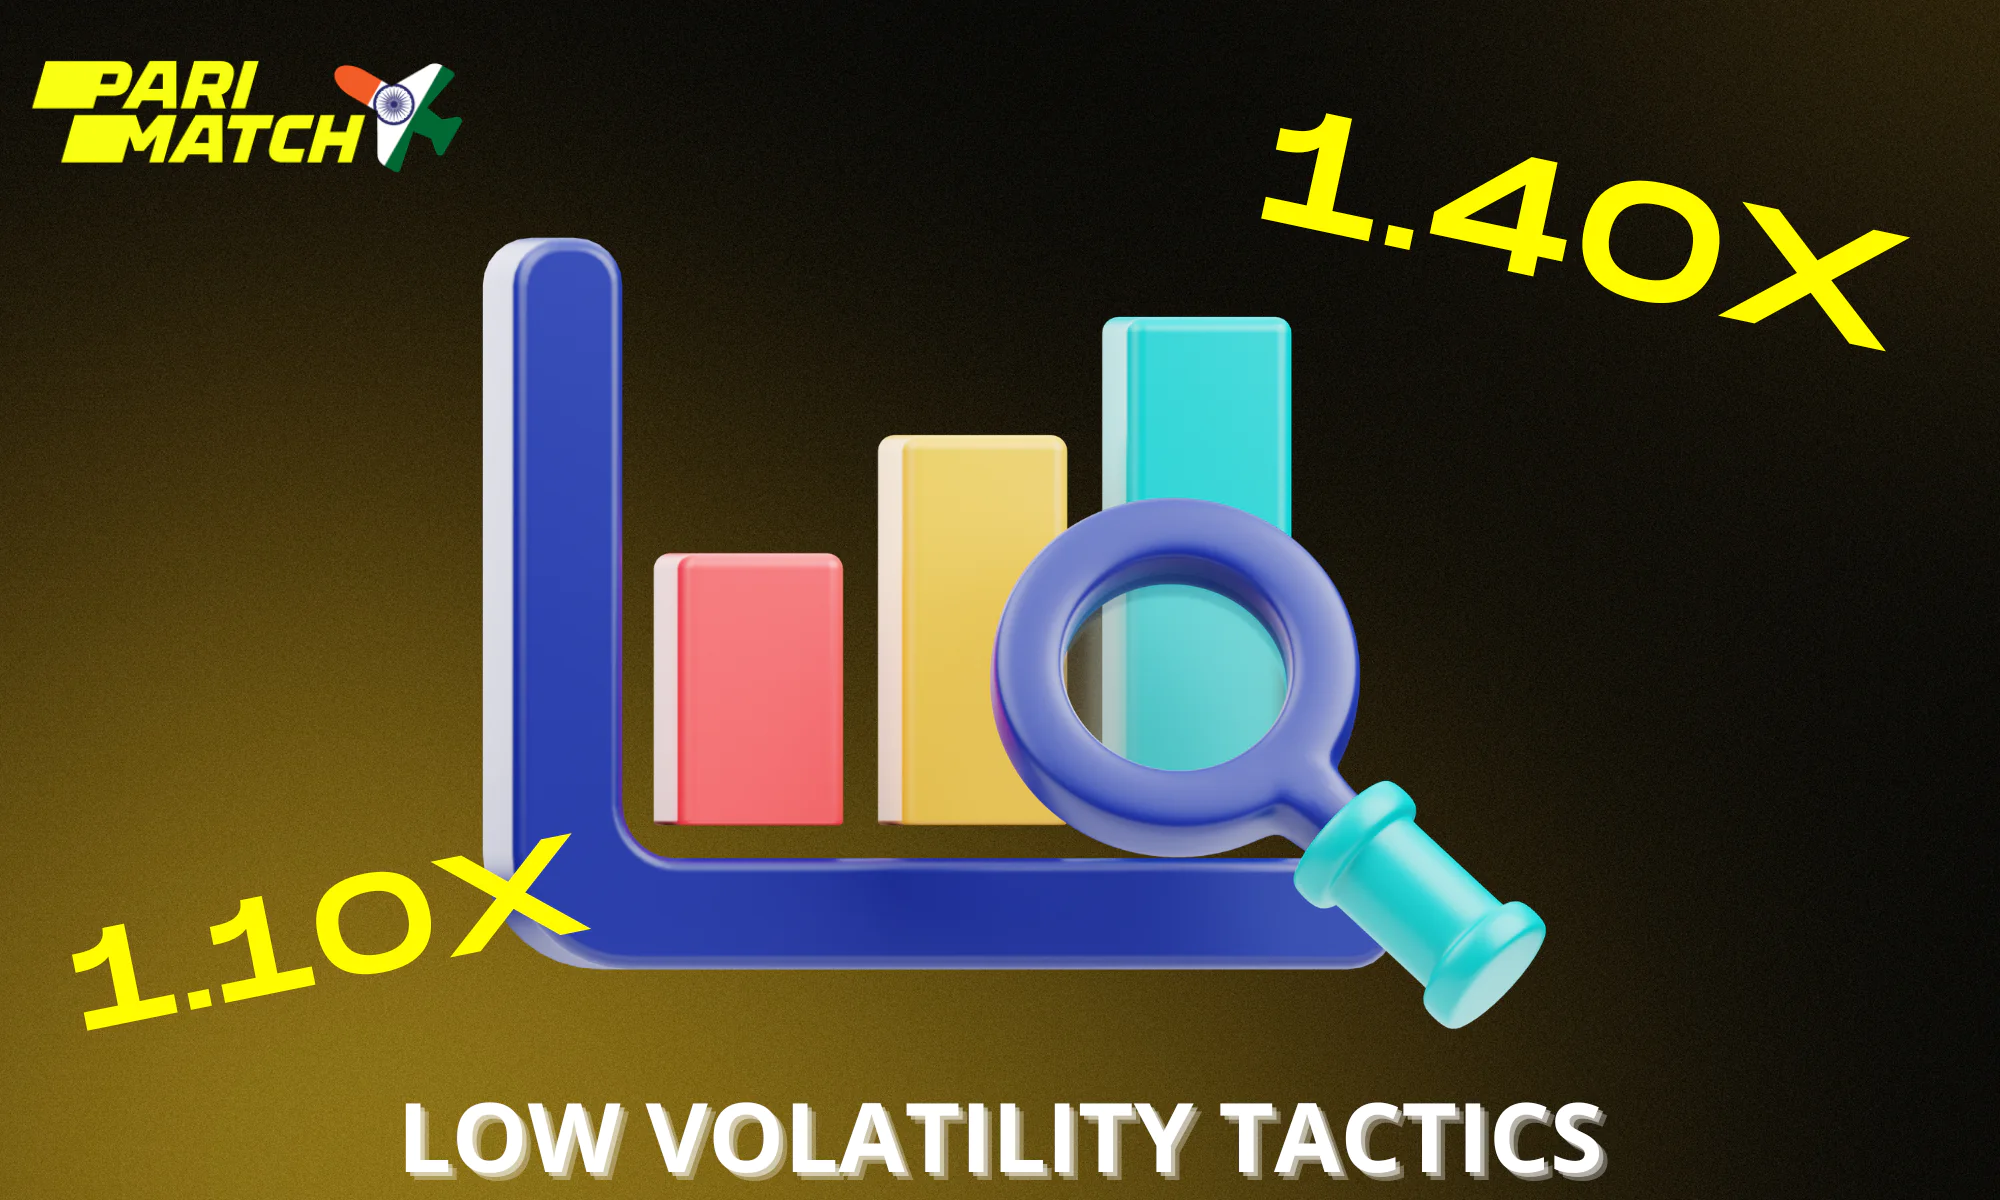 Withdrawal tactics with odds from 1.10x to 1.40x